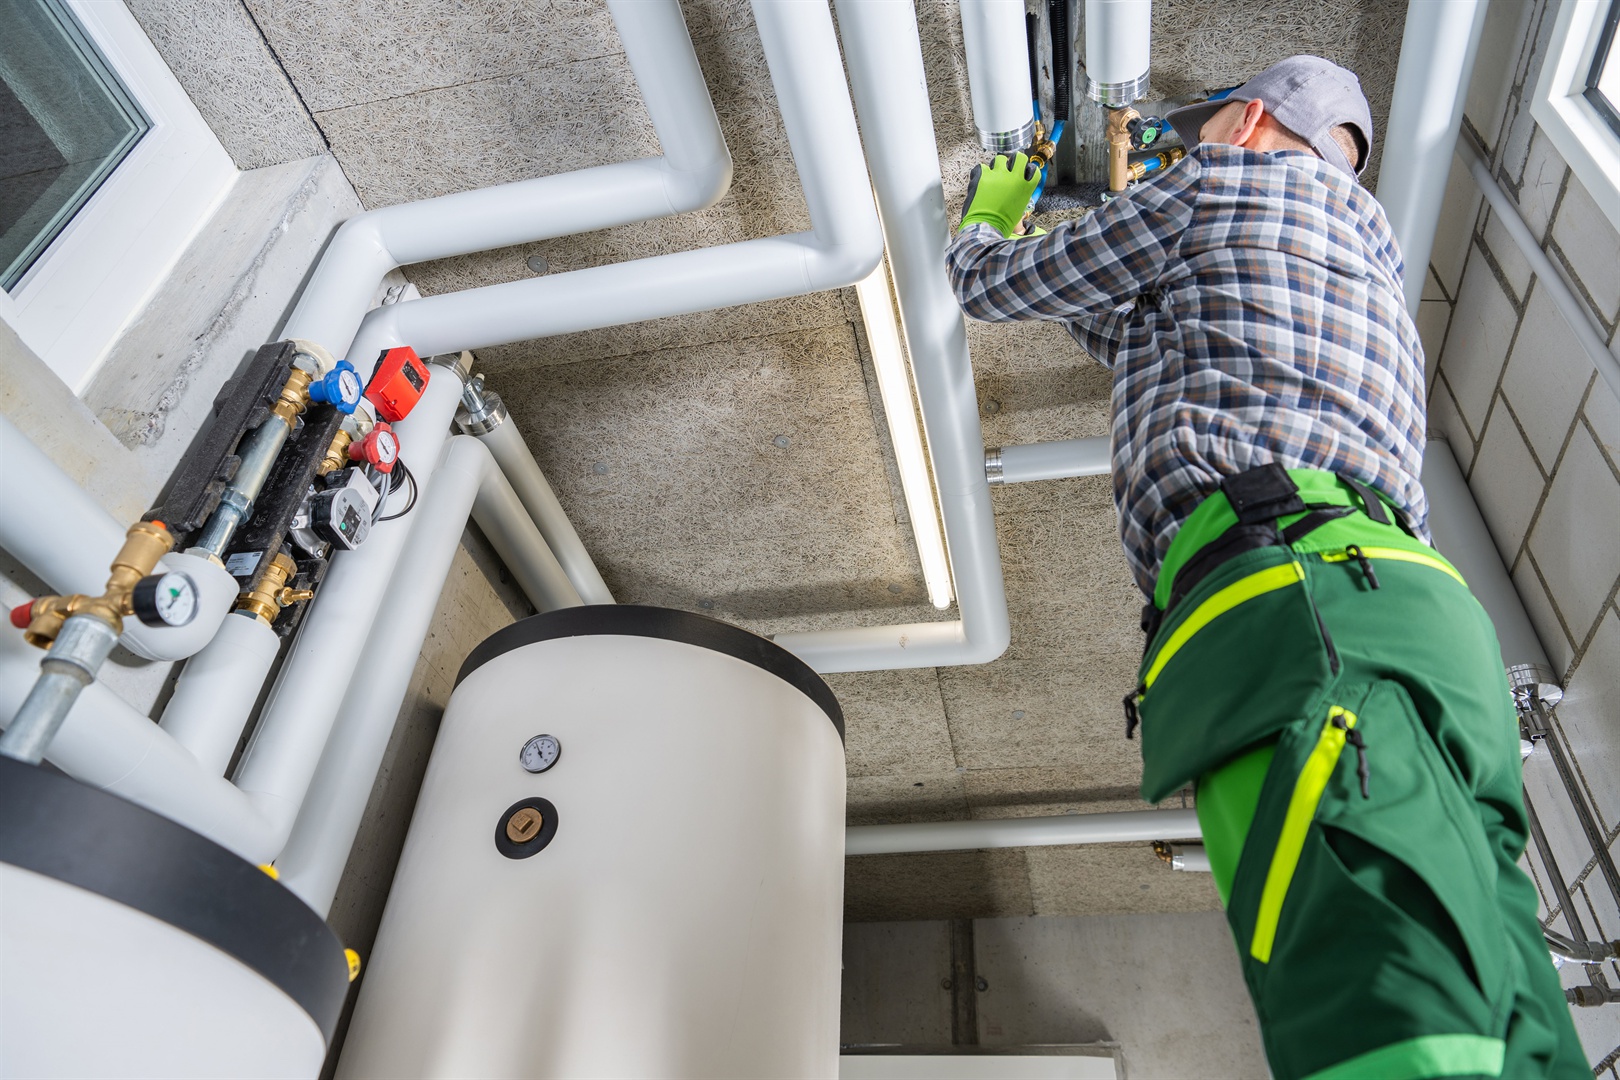 Commercial Plumbing services provided by Wrench It Up plumbing and mechanical